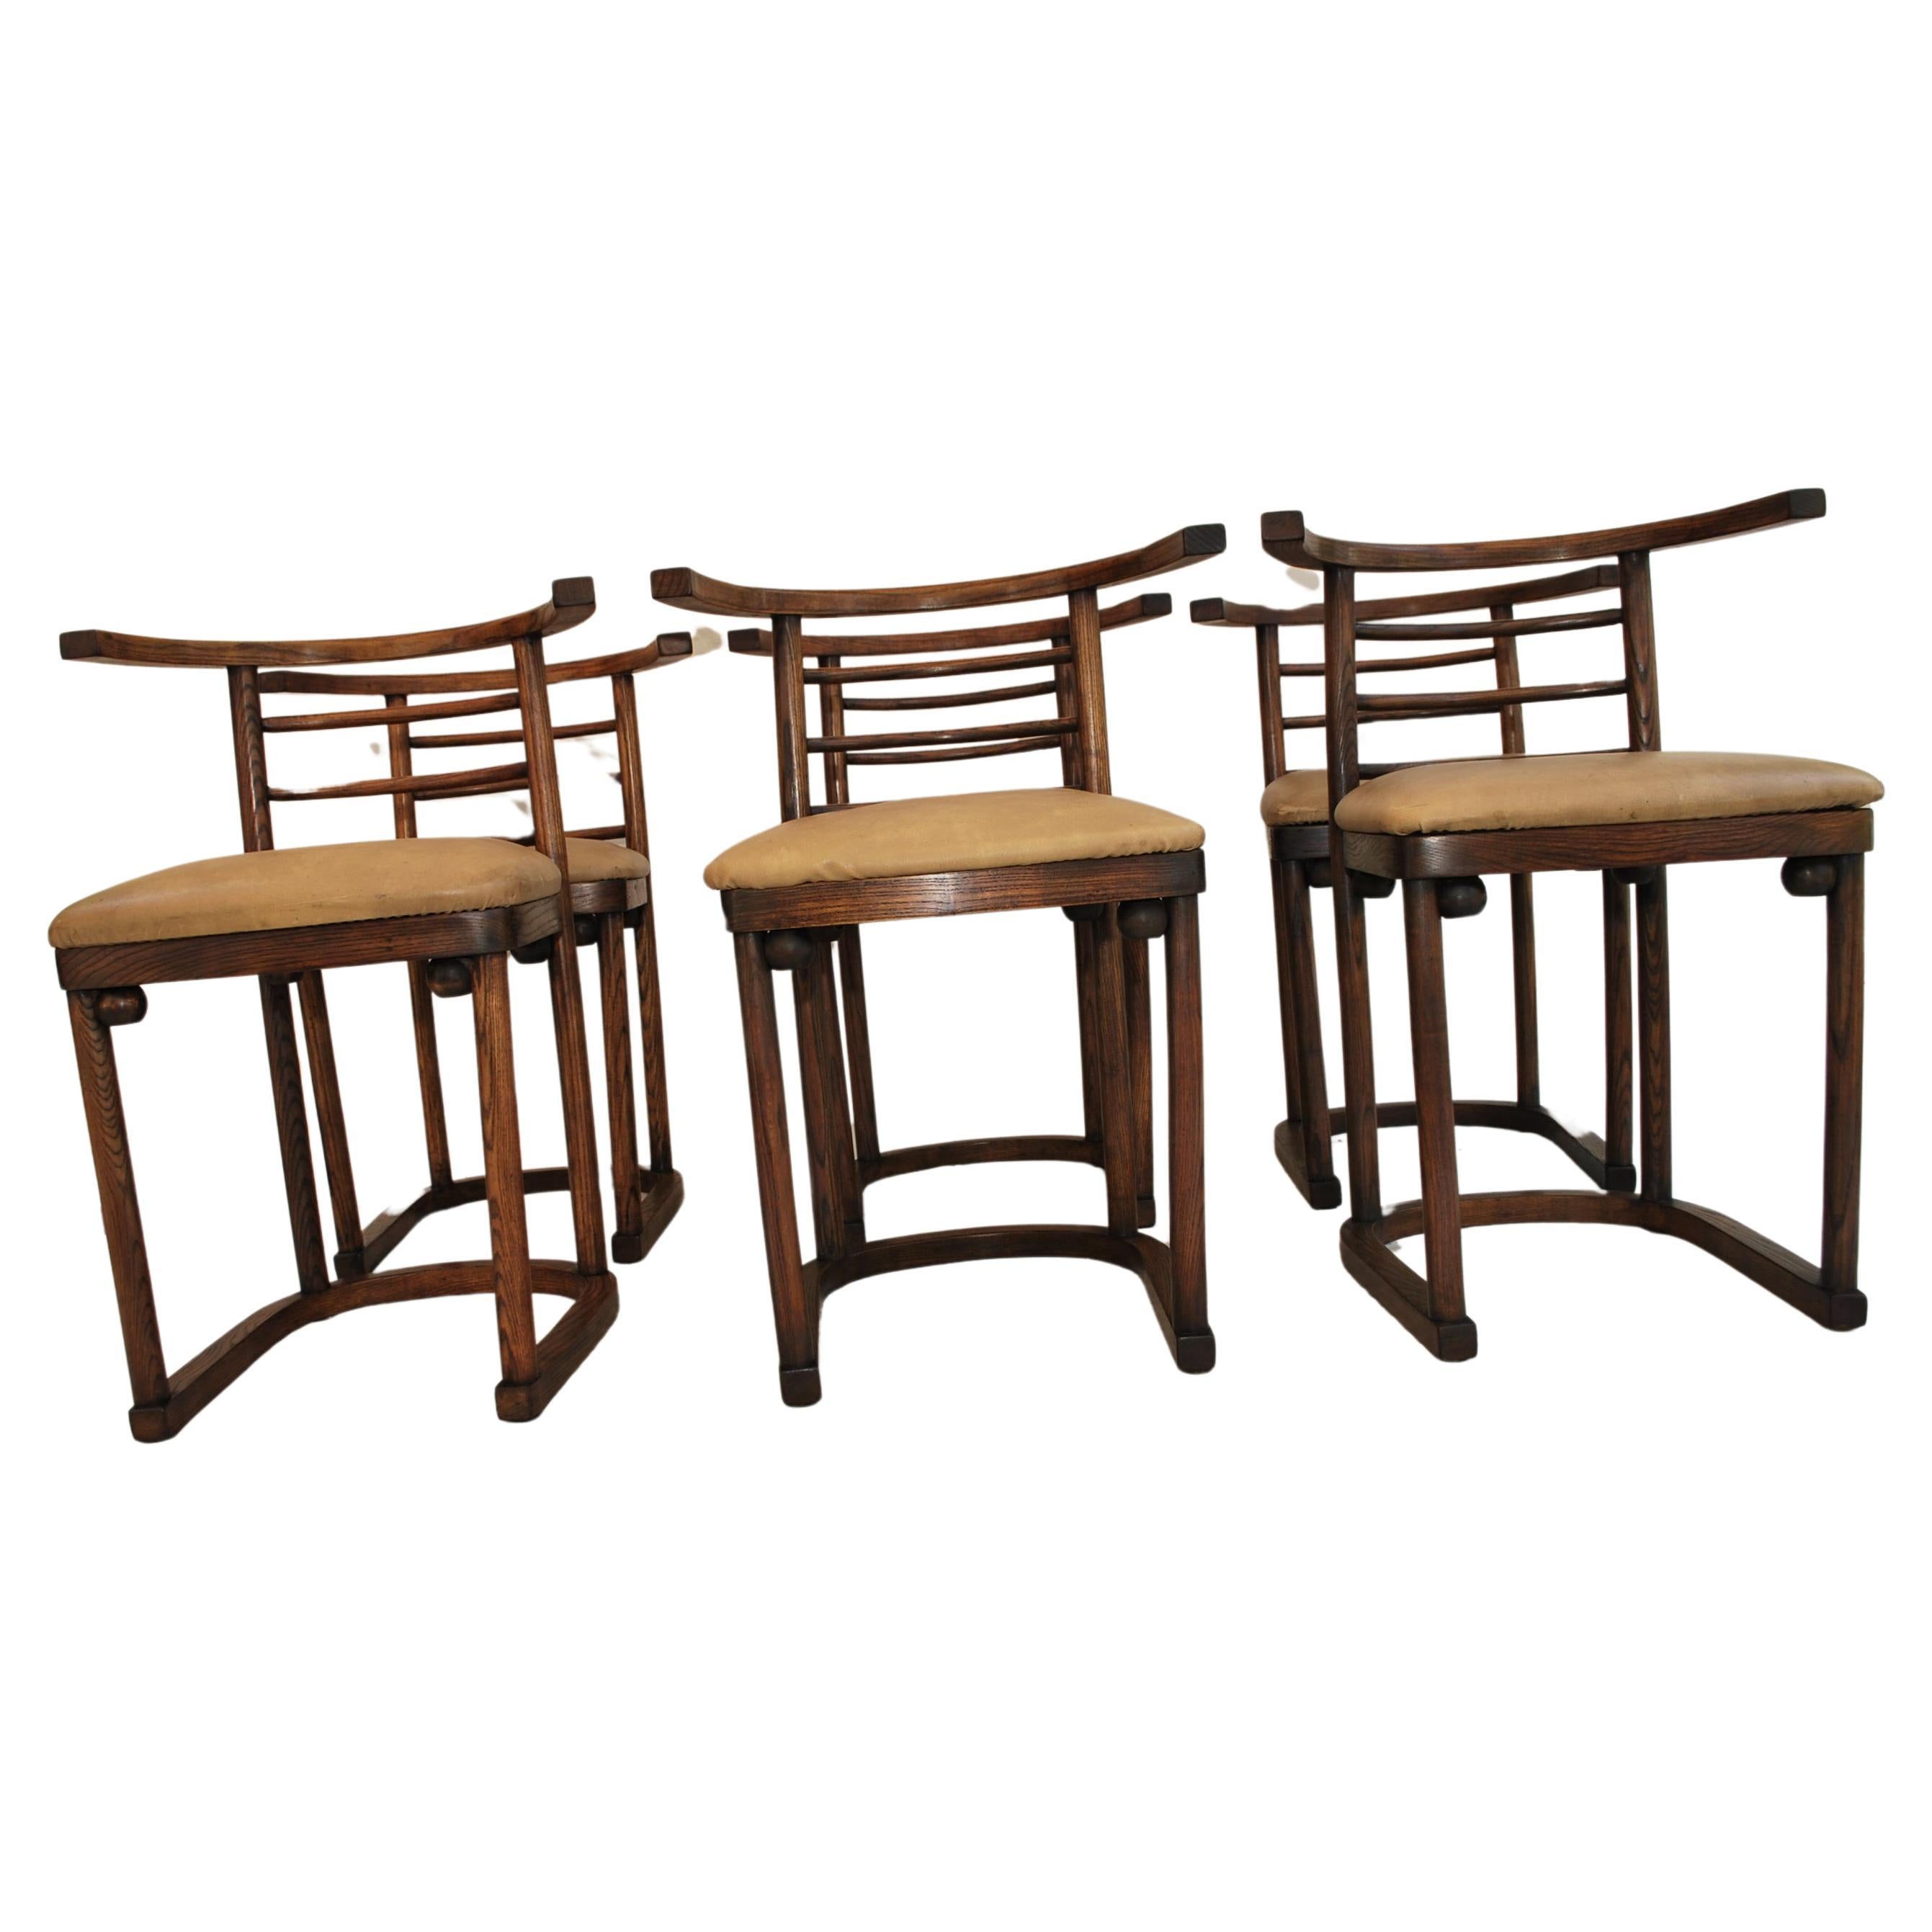 Elegant set of six 1940's chairs by Josef Hoffmann for taonet 